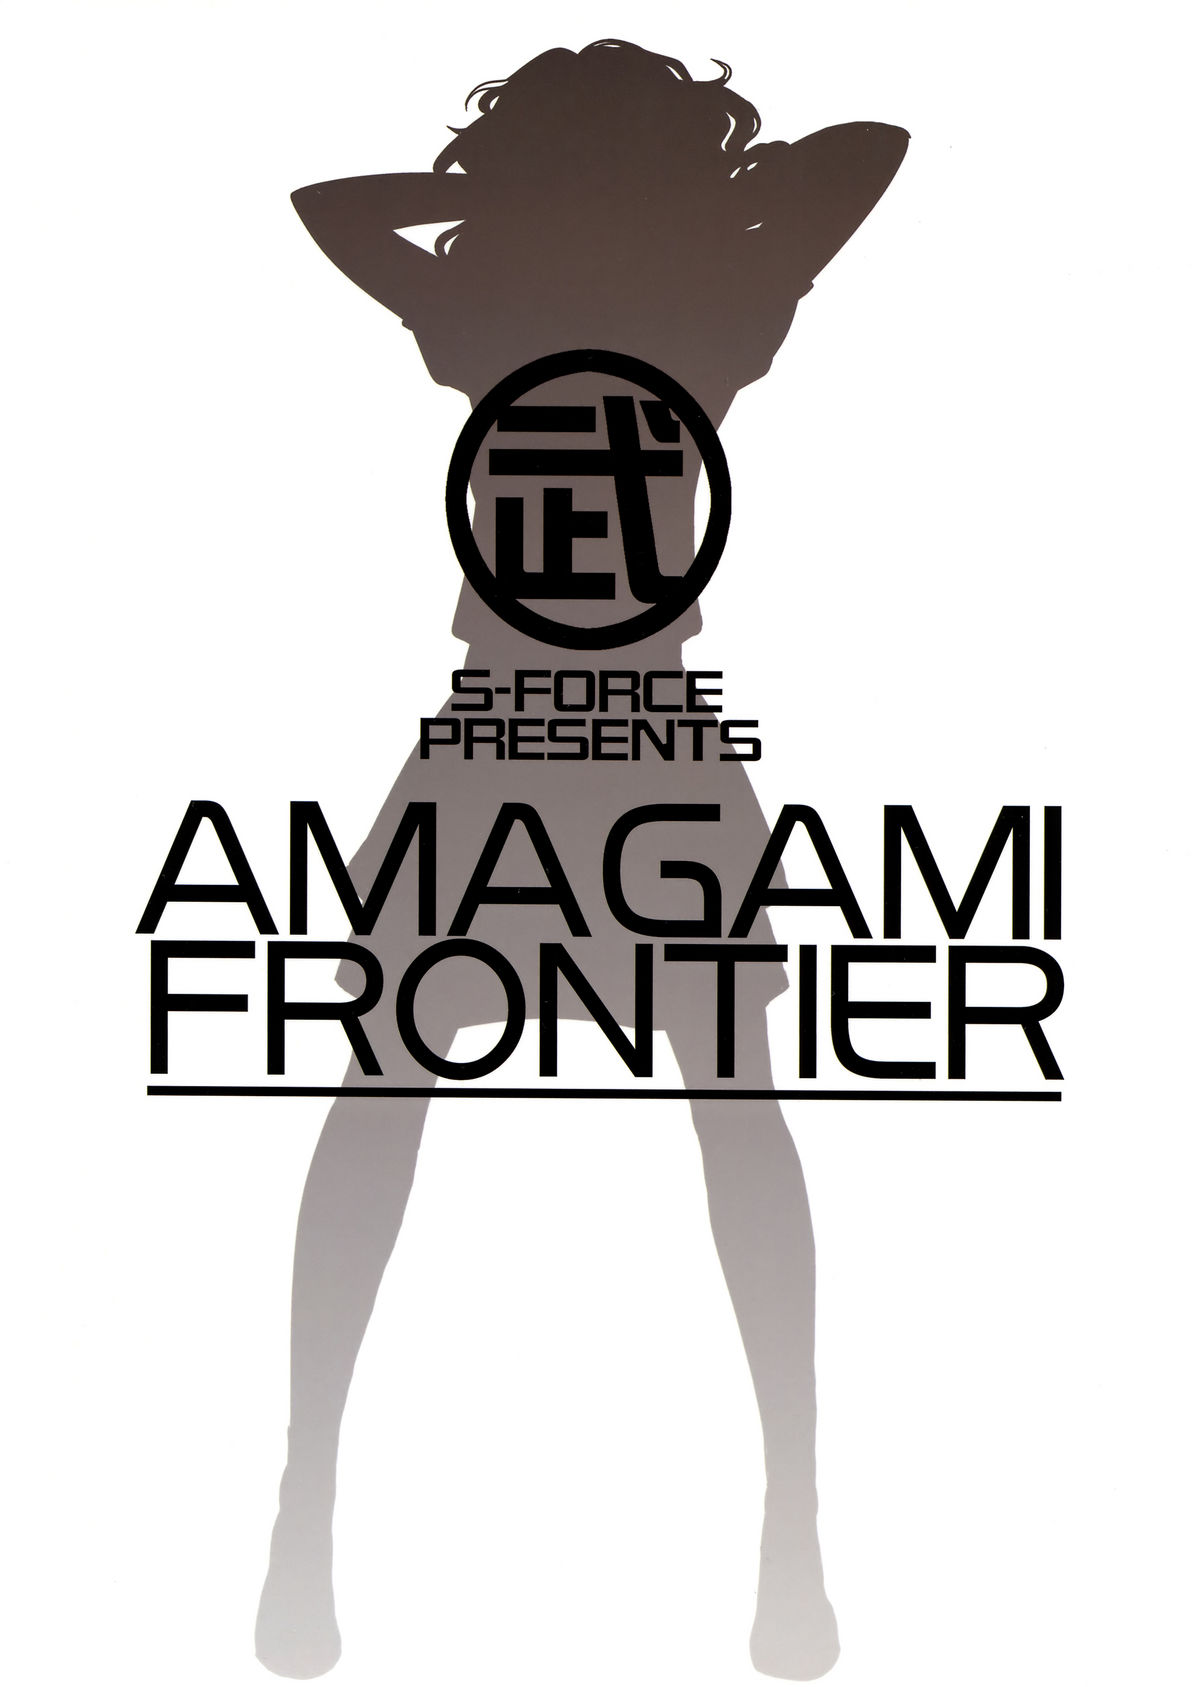 (C76) [S-FORCE (Takemasa Takeshi)] - AMAGAMi FRONTiER (Amagami) [ENG] (C76) (同人誌) [S-FORCE (武将)] AMAGAMi FRONTiER (アマガミ)